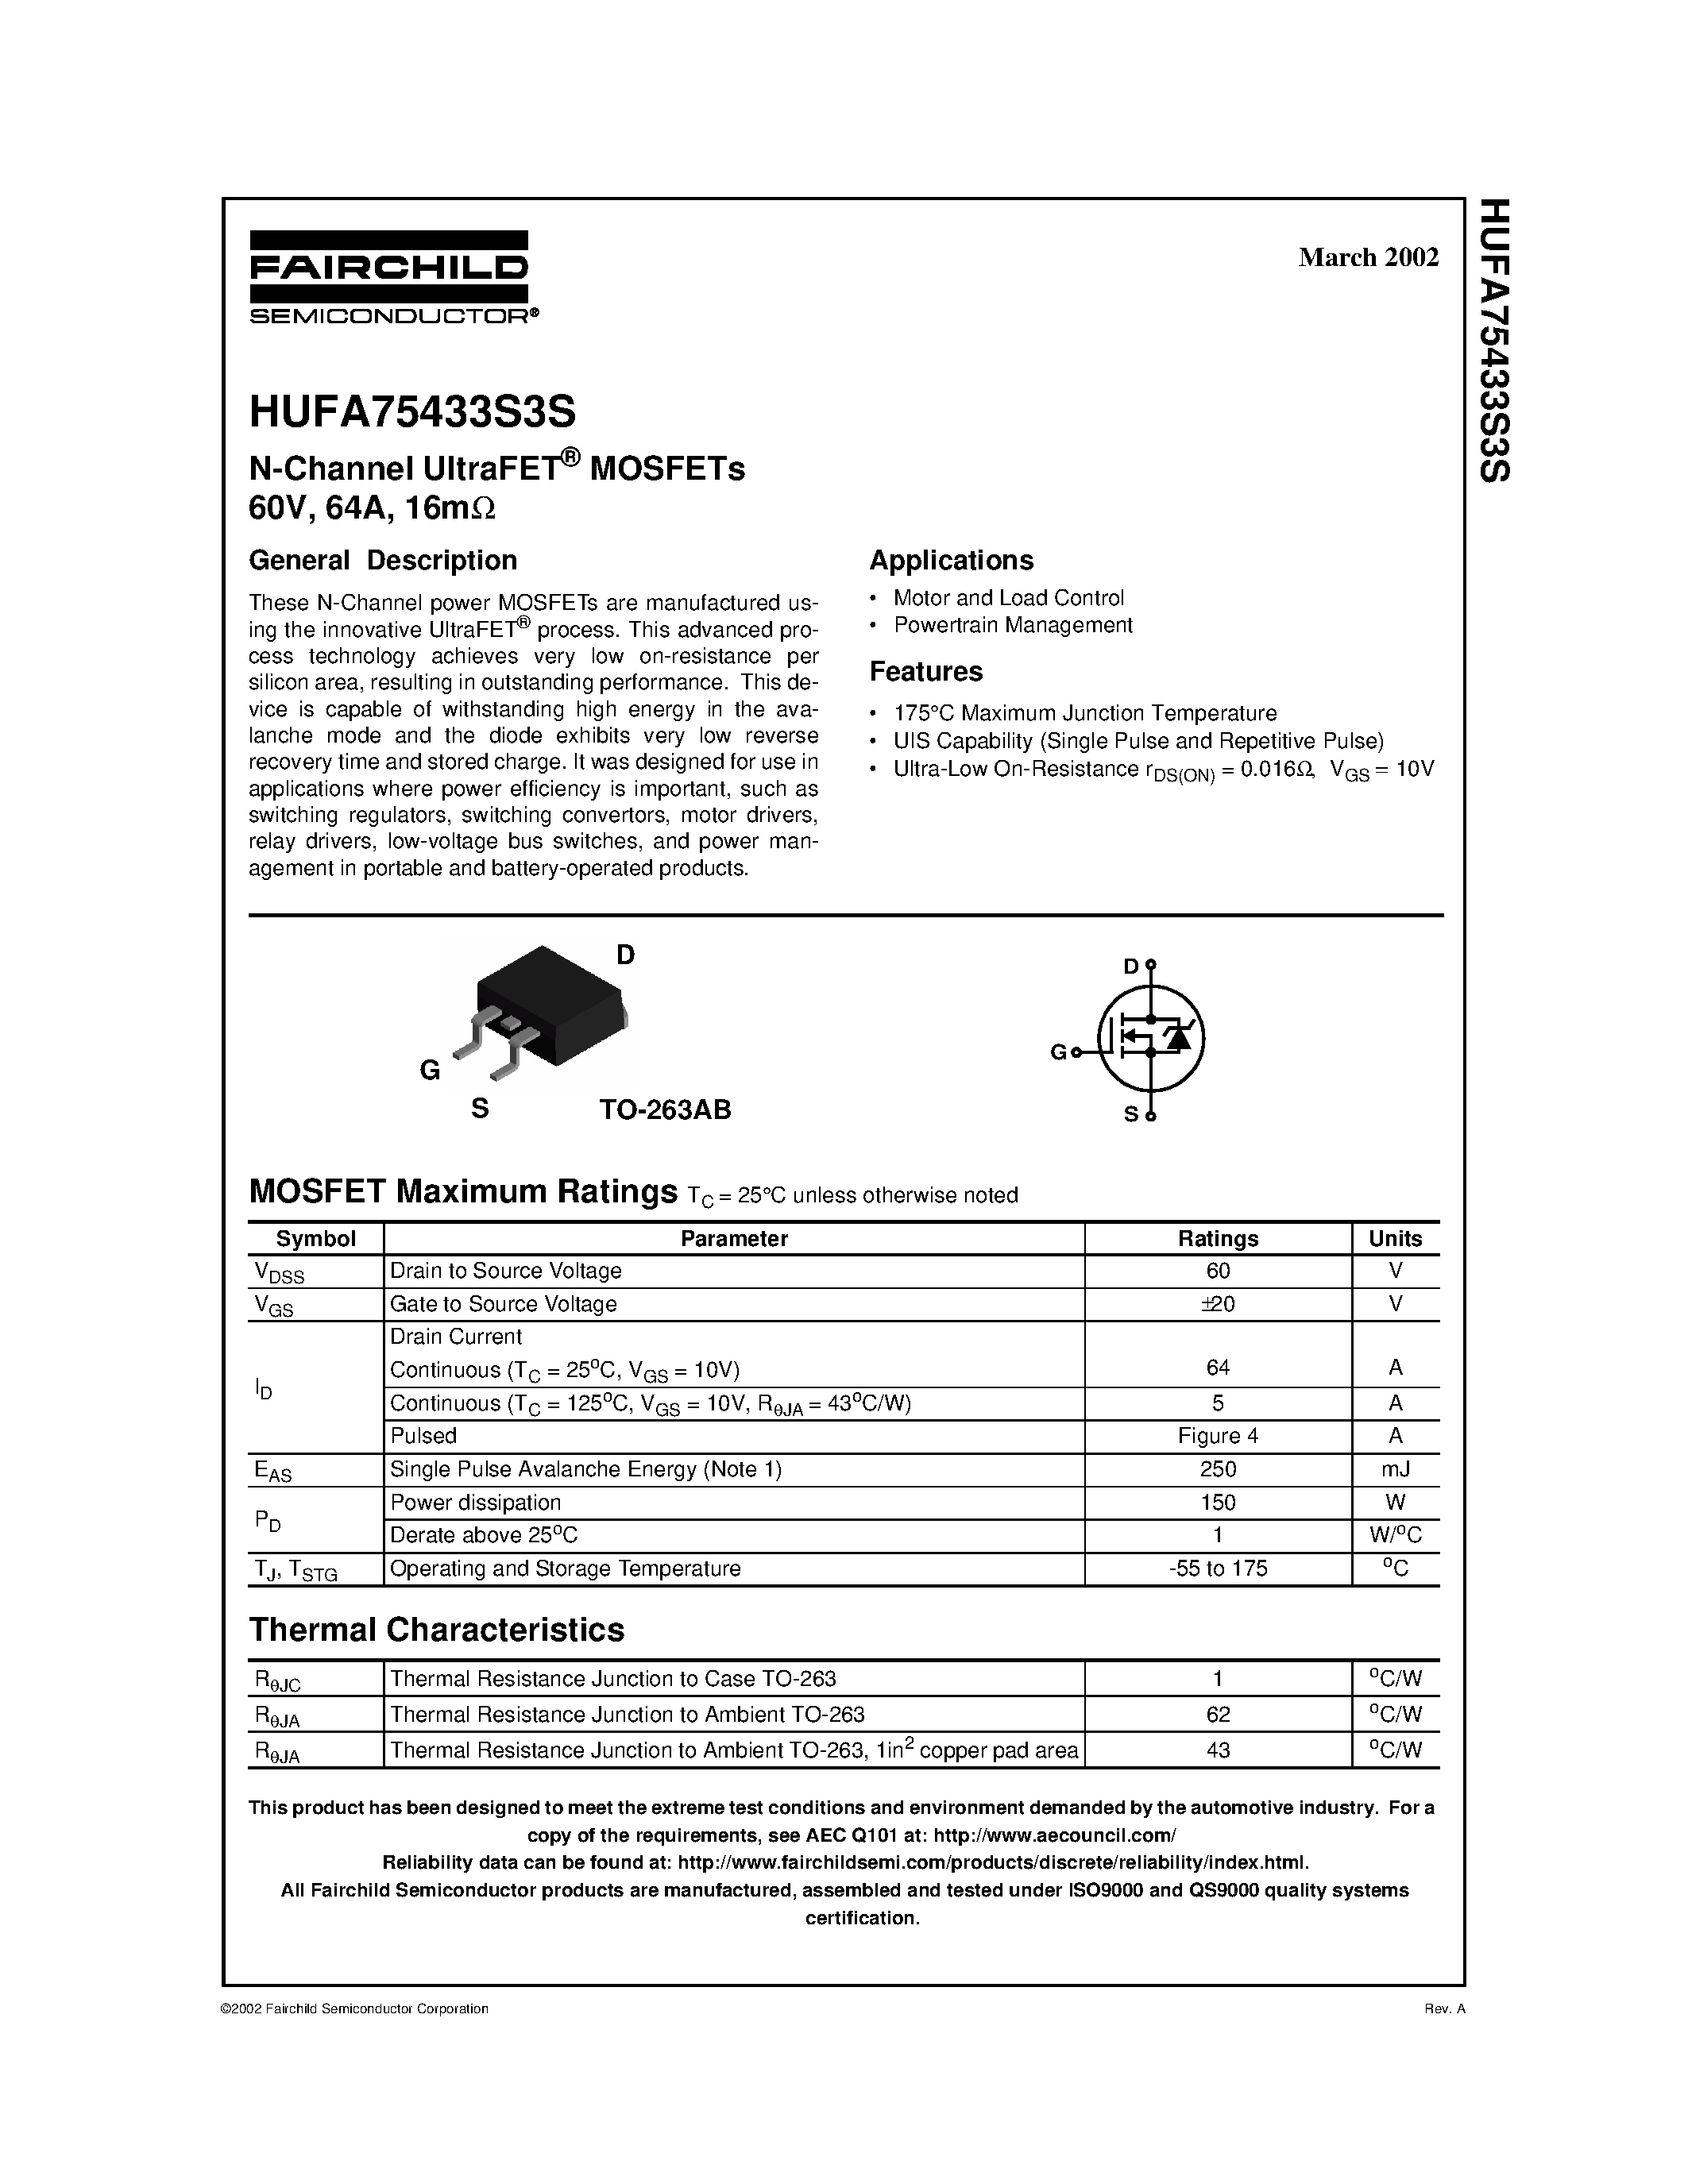 Datasheet HUFA75433S3S - N-Channel UltraFET MOSFETs 60V/ 64A/ 16m page 1